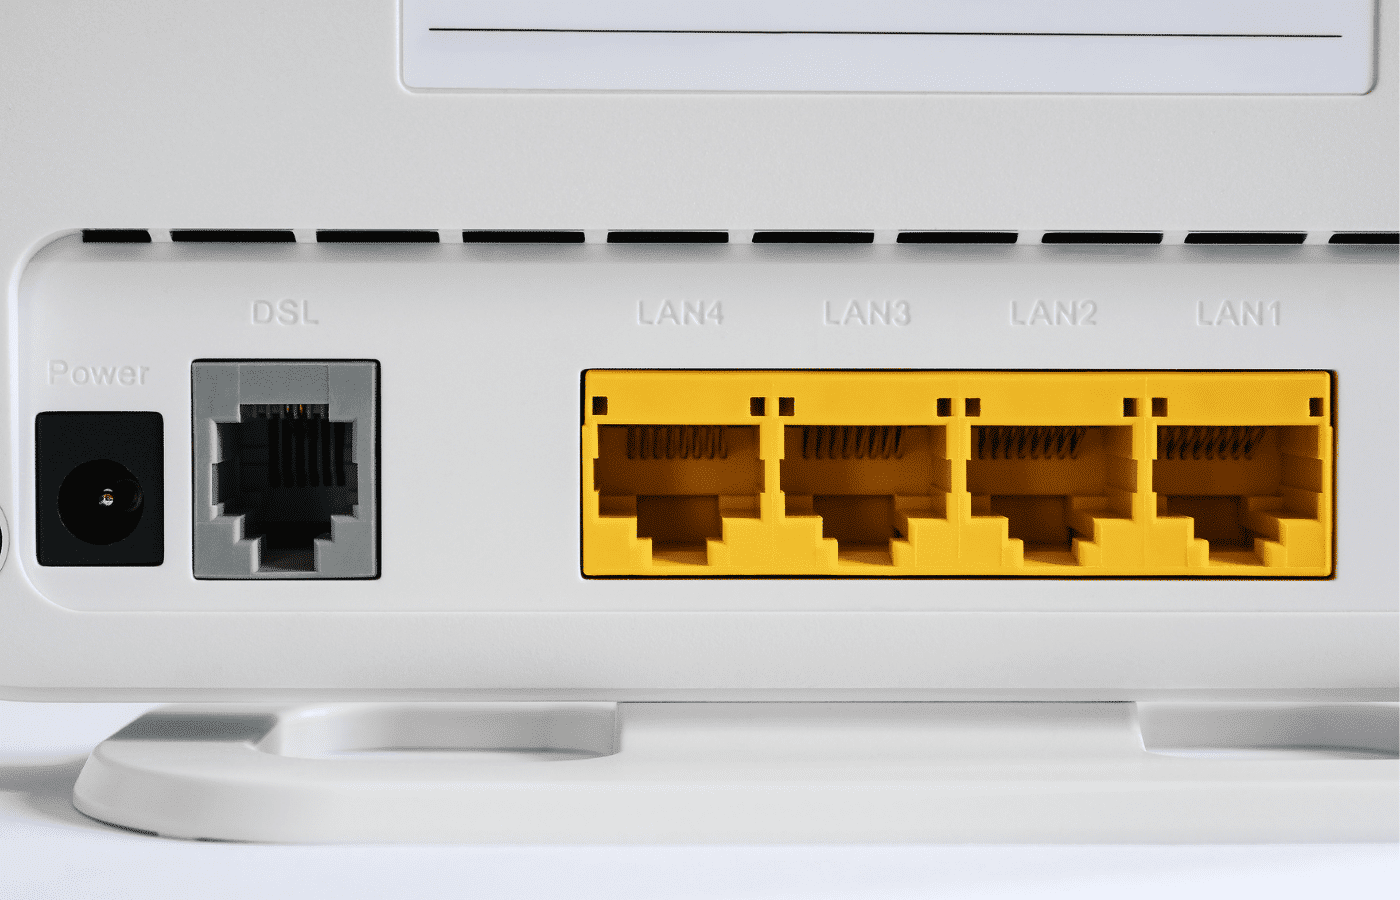 Can a Vdsl Router Be Used for Adsl